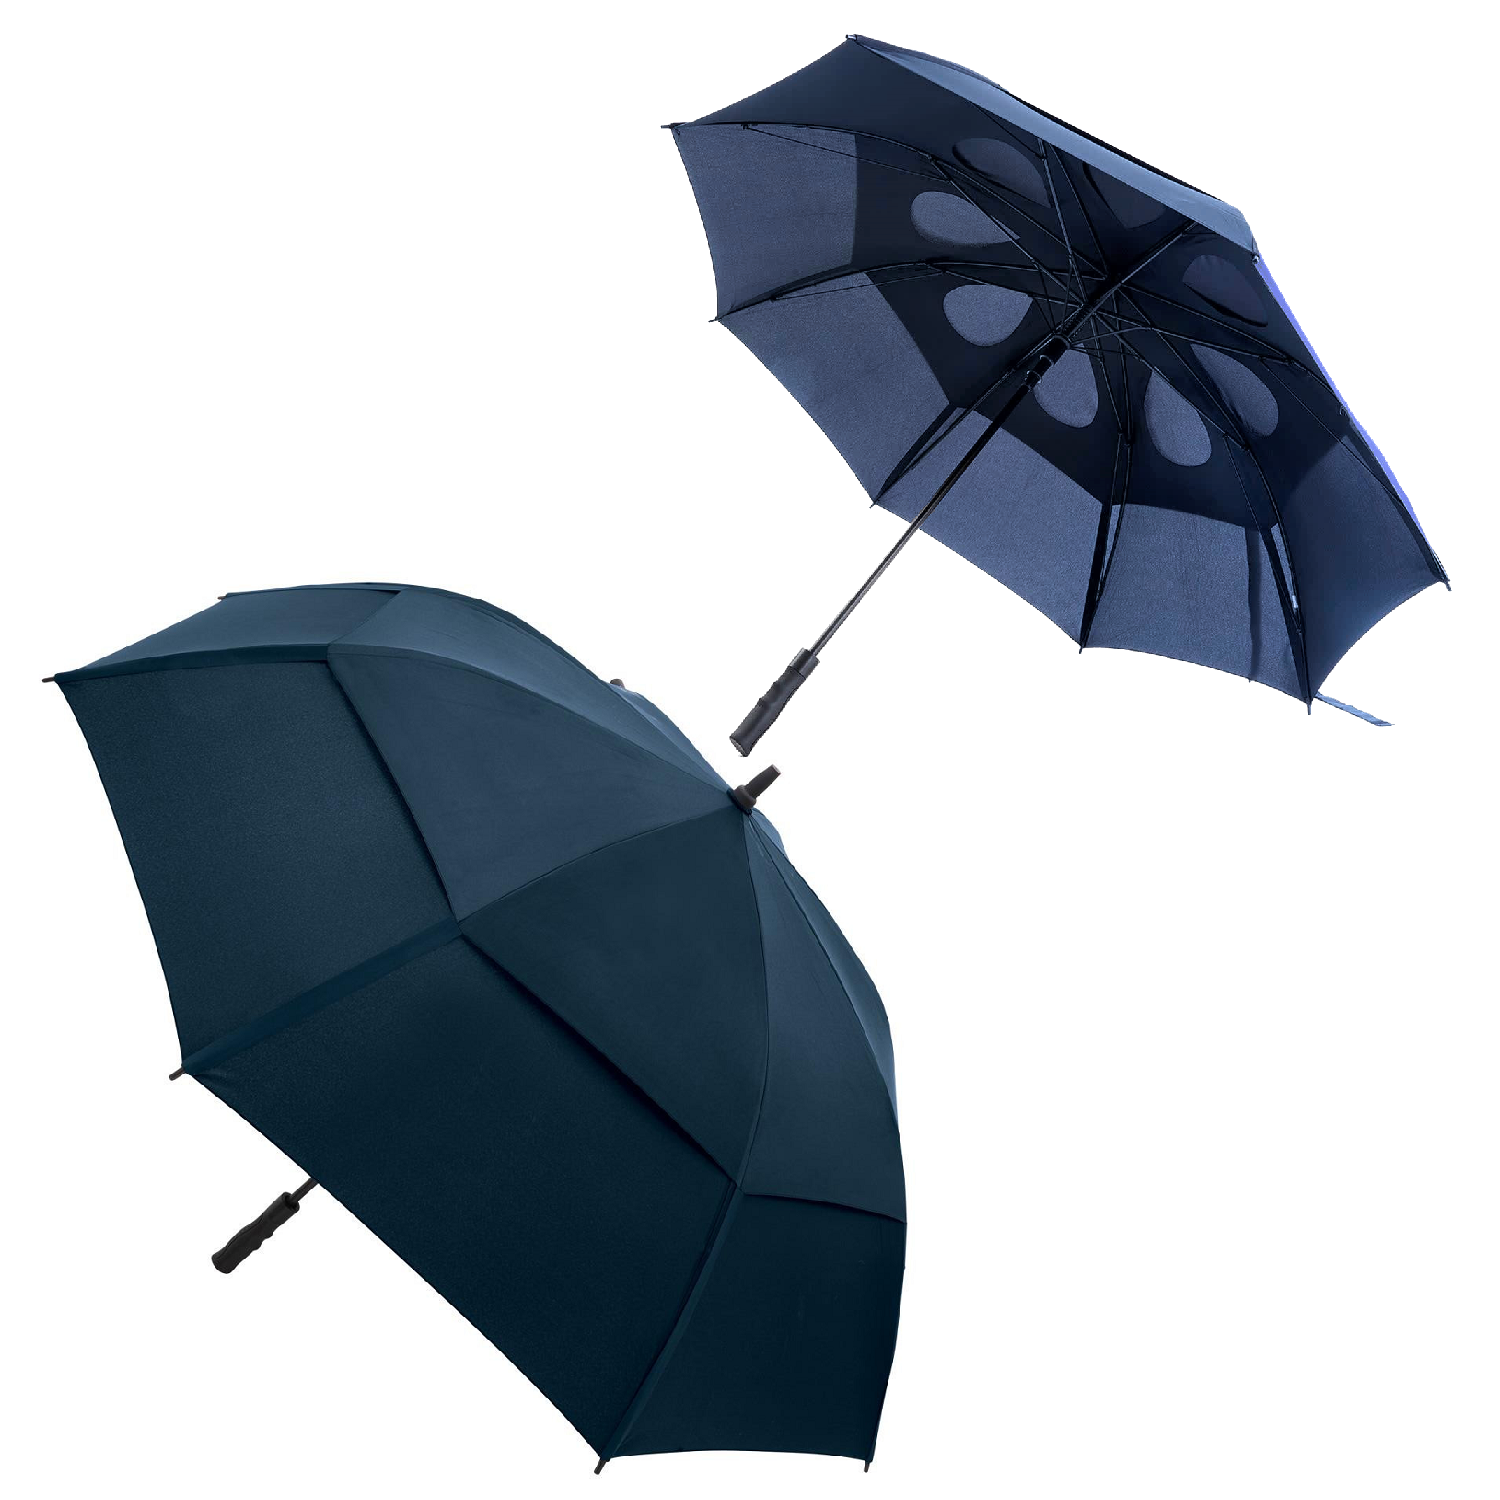 UMBRA_-ultimate-heavy-duty-umbrella-superior-fibreglass-ultimate_-frame-double-layer-wind-vent-system-navy-2